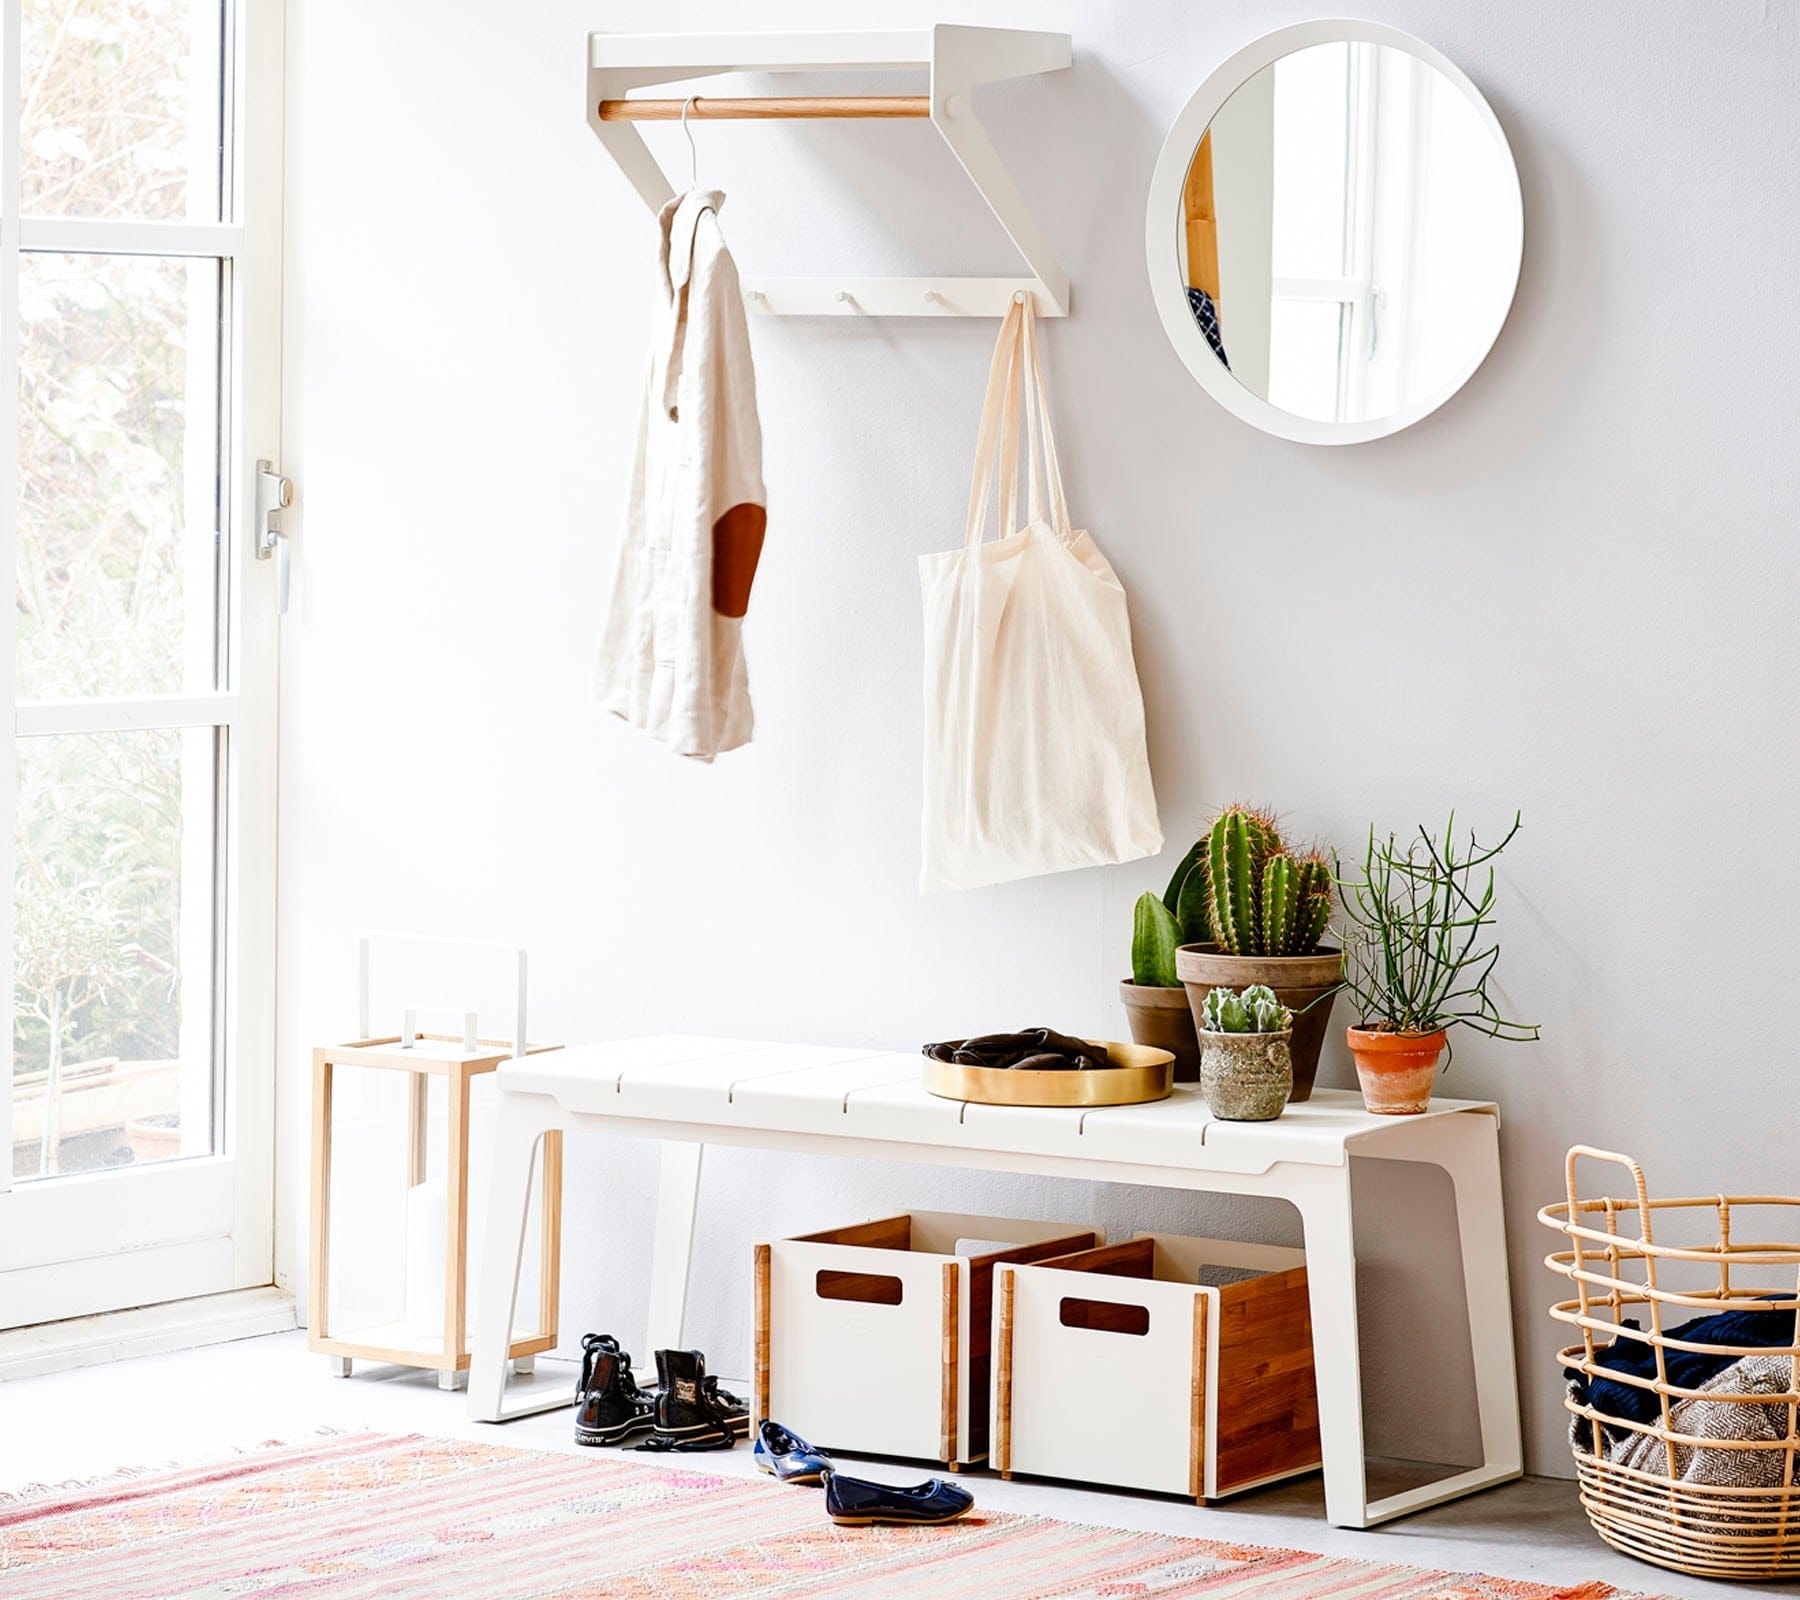 Boxhill's Copenhagen City Rack Teak/White lifestyle image with fabric bag and a white clothes hanging